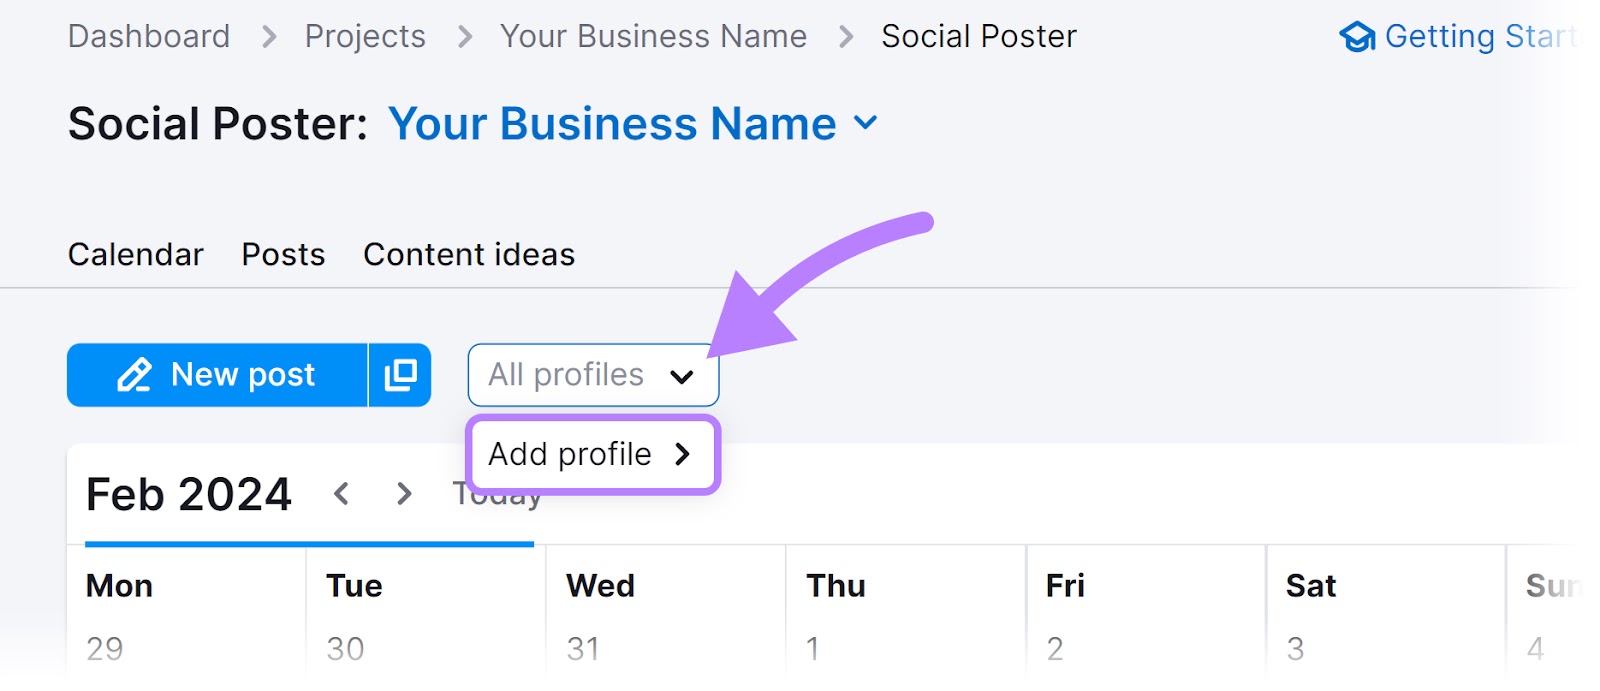 "Add profile" button in Social Poster tool